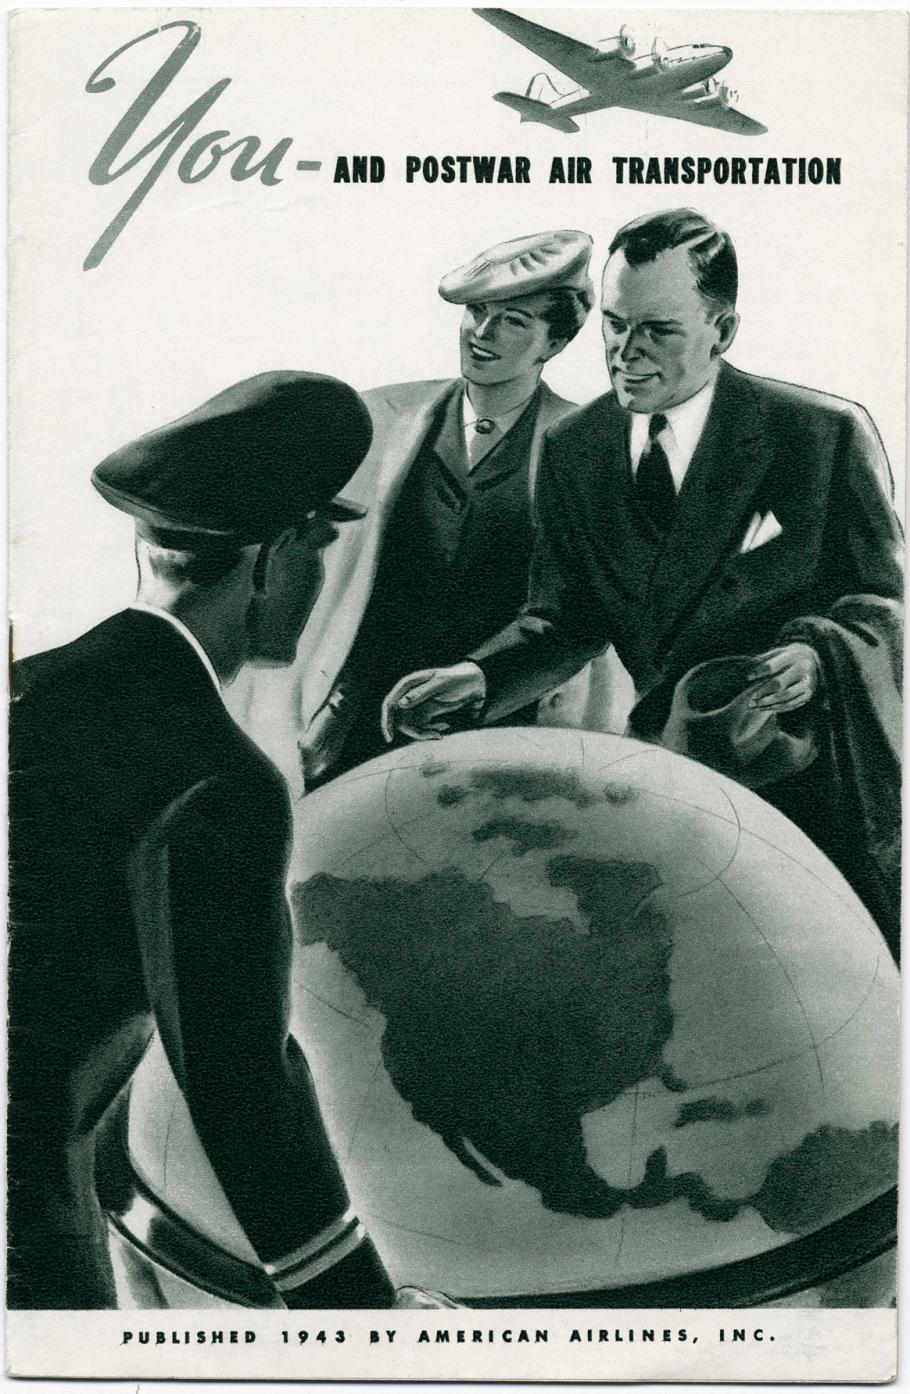 Black and white American Airlines travel brochure promoting the airline following World War II. The brochure features an image of two people and a pilot looking at a large globe.